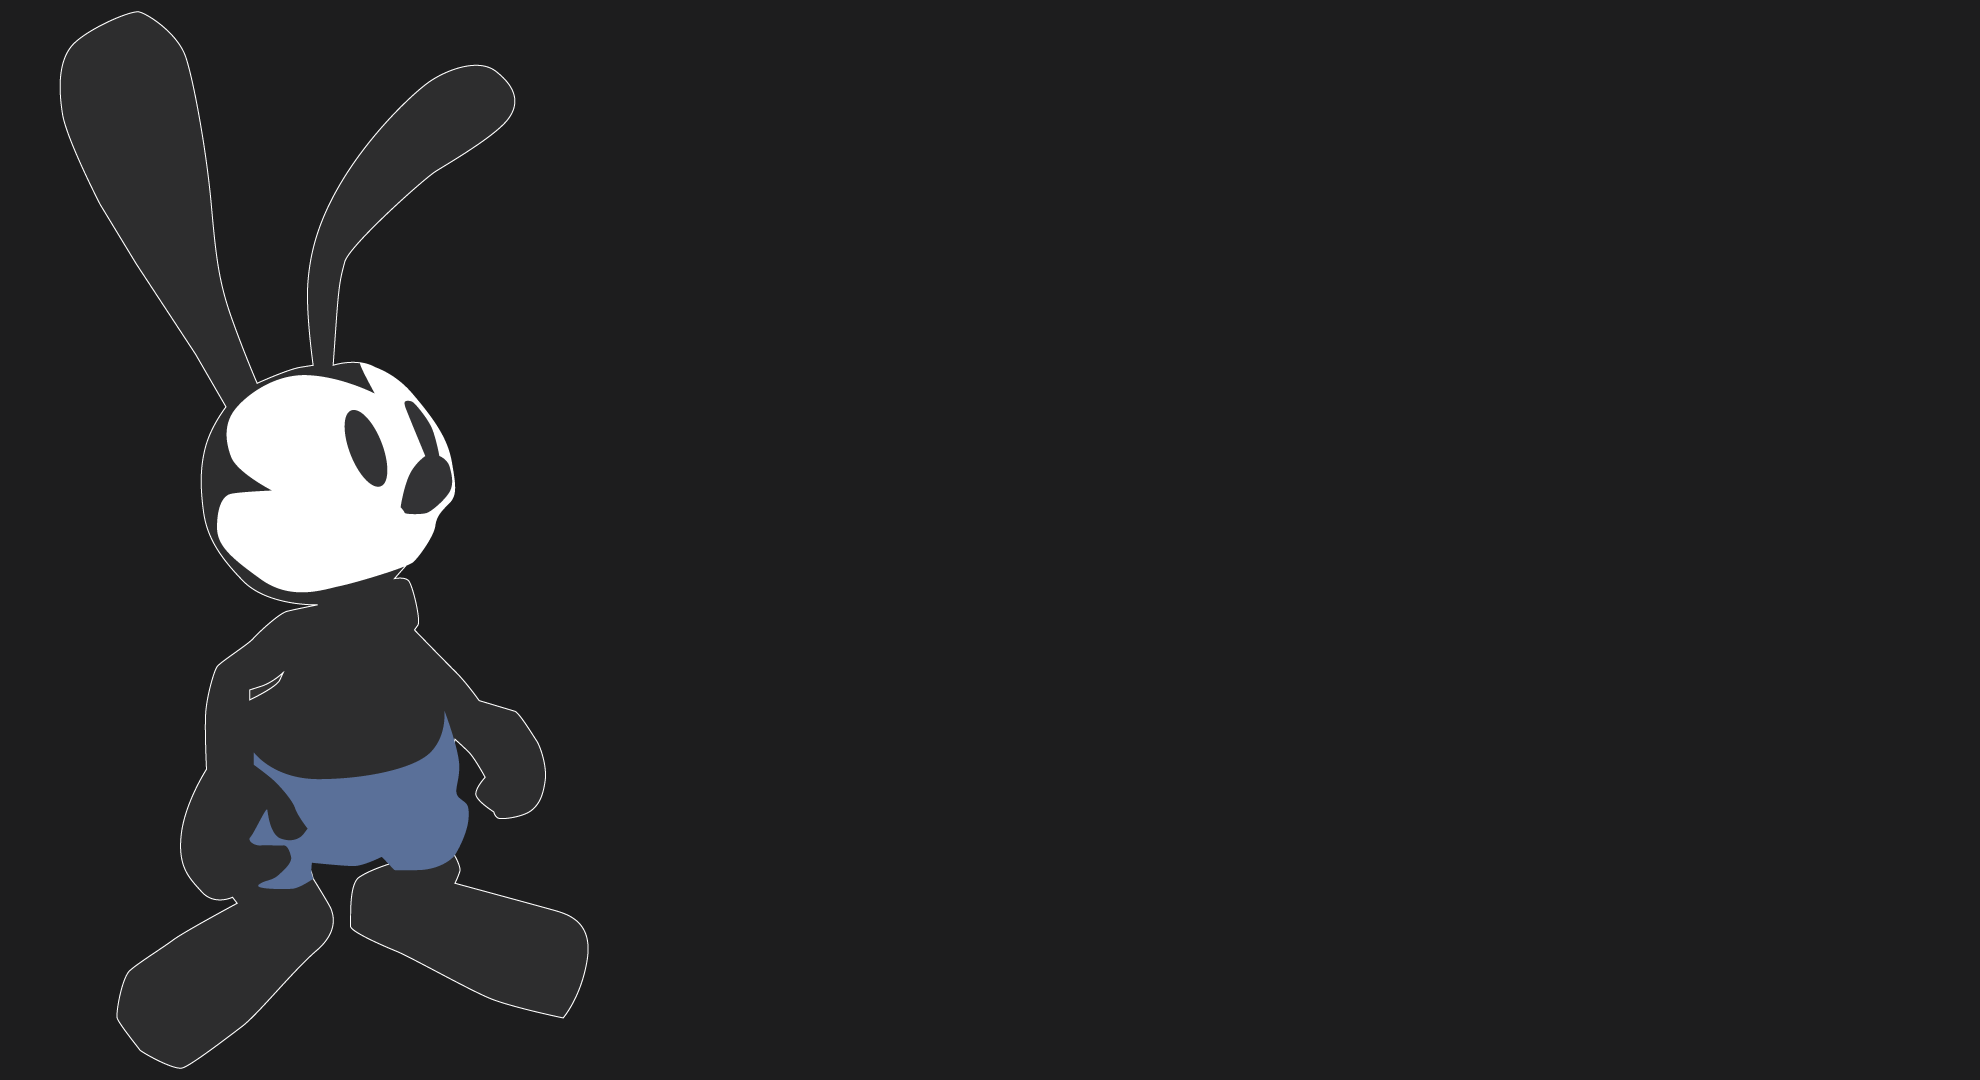 Oswald The Lucky Rabbit Wallpapers